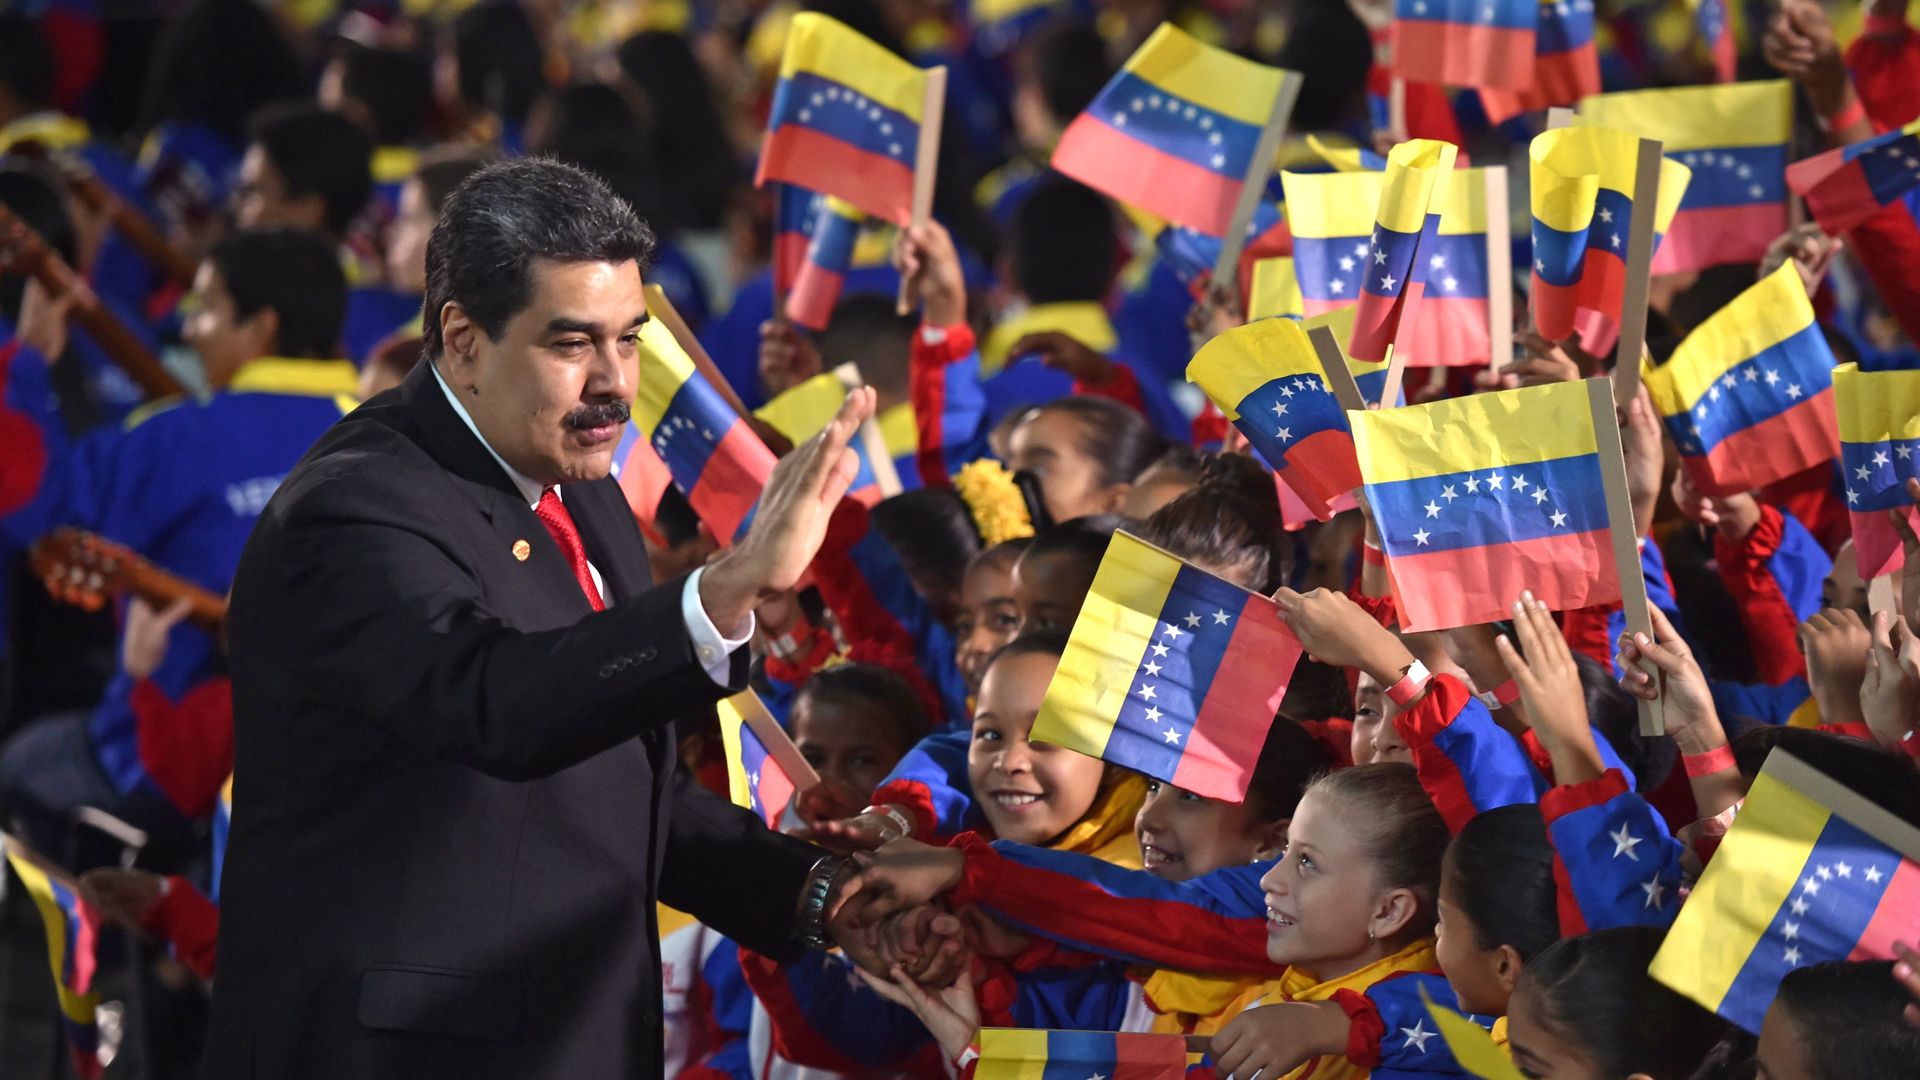 Venezuela's President Nicolas Maduro greets children upon arrival for the inauguration ceremony of his second mandate